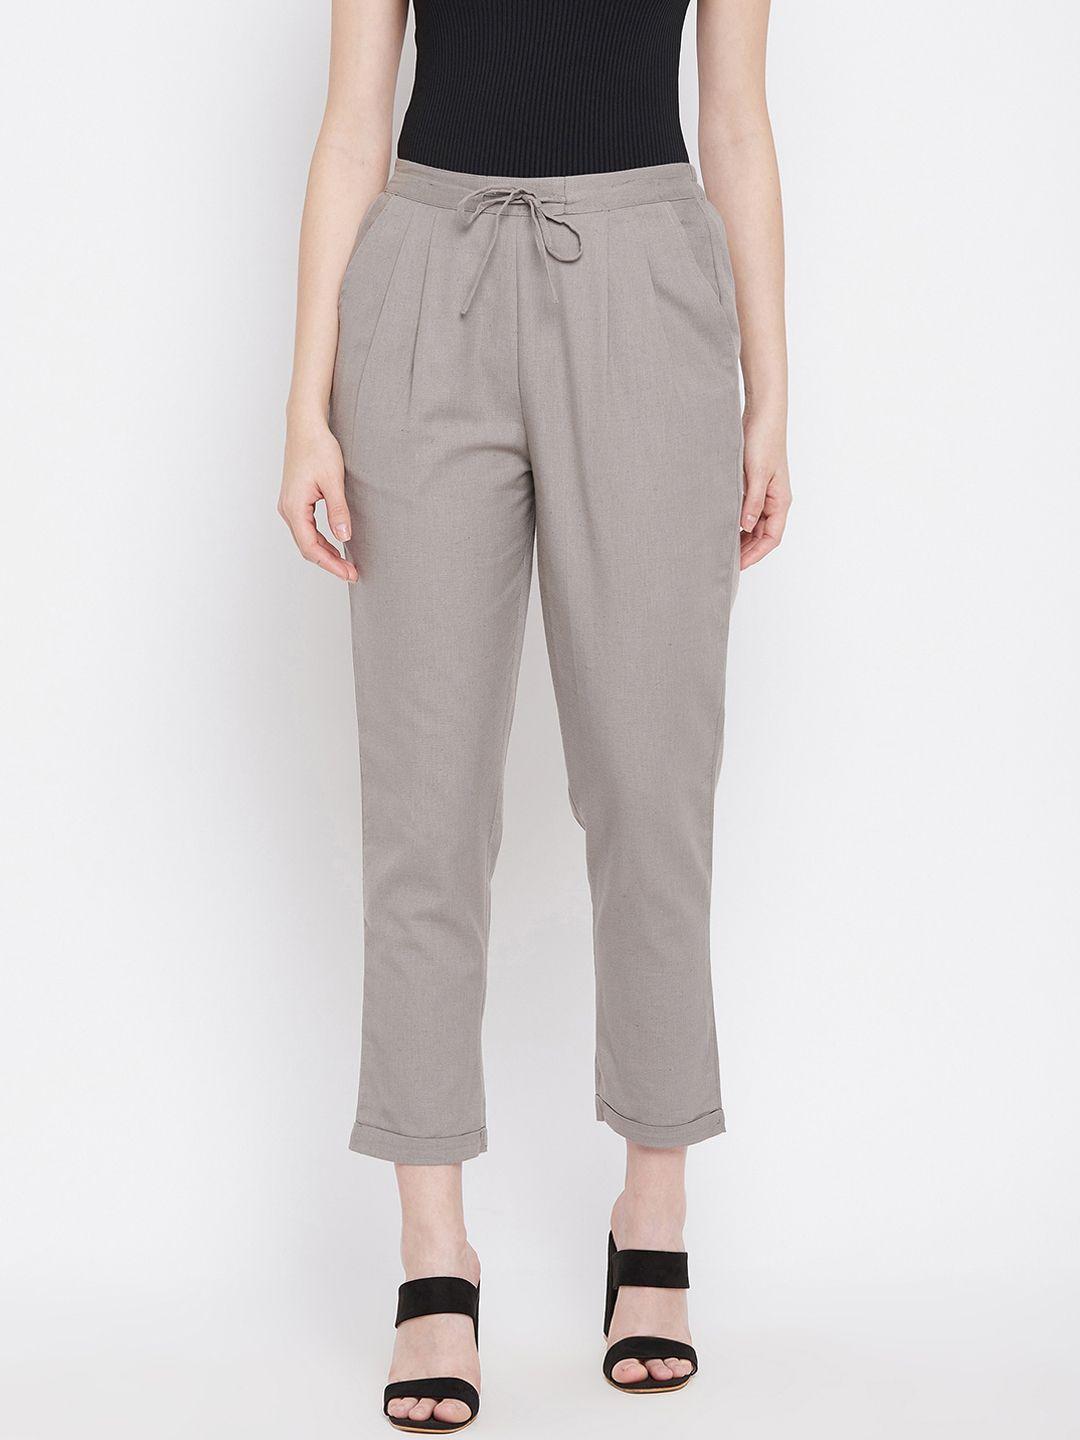 winered-women-grey-solid-pleated-trousers